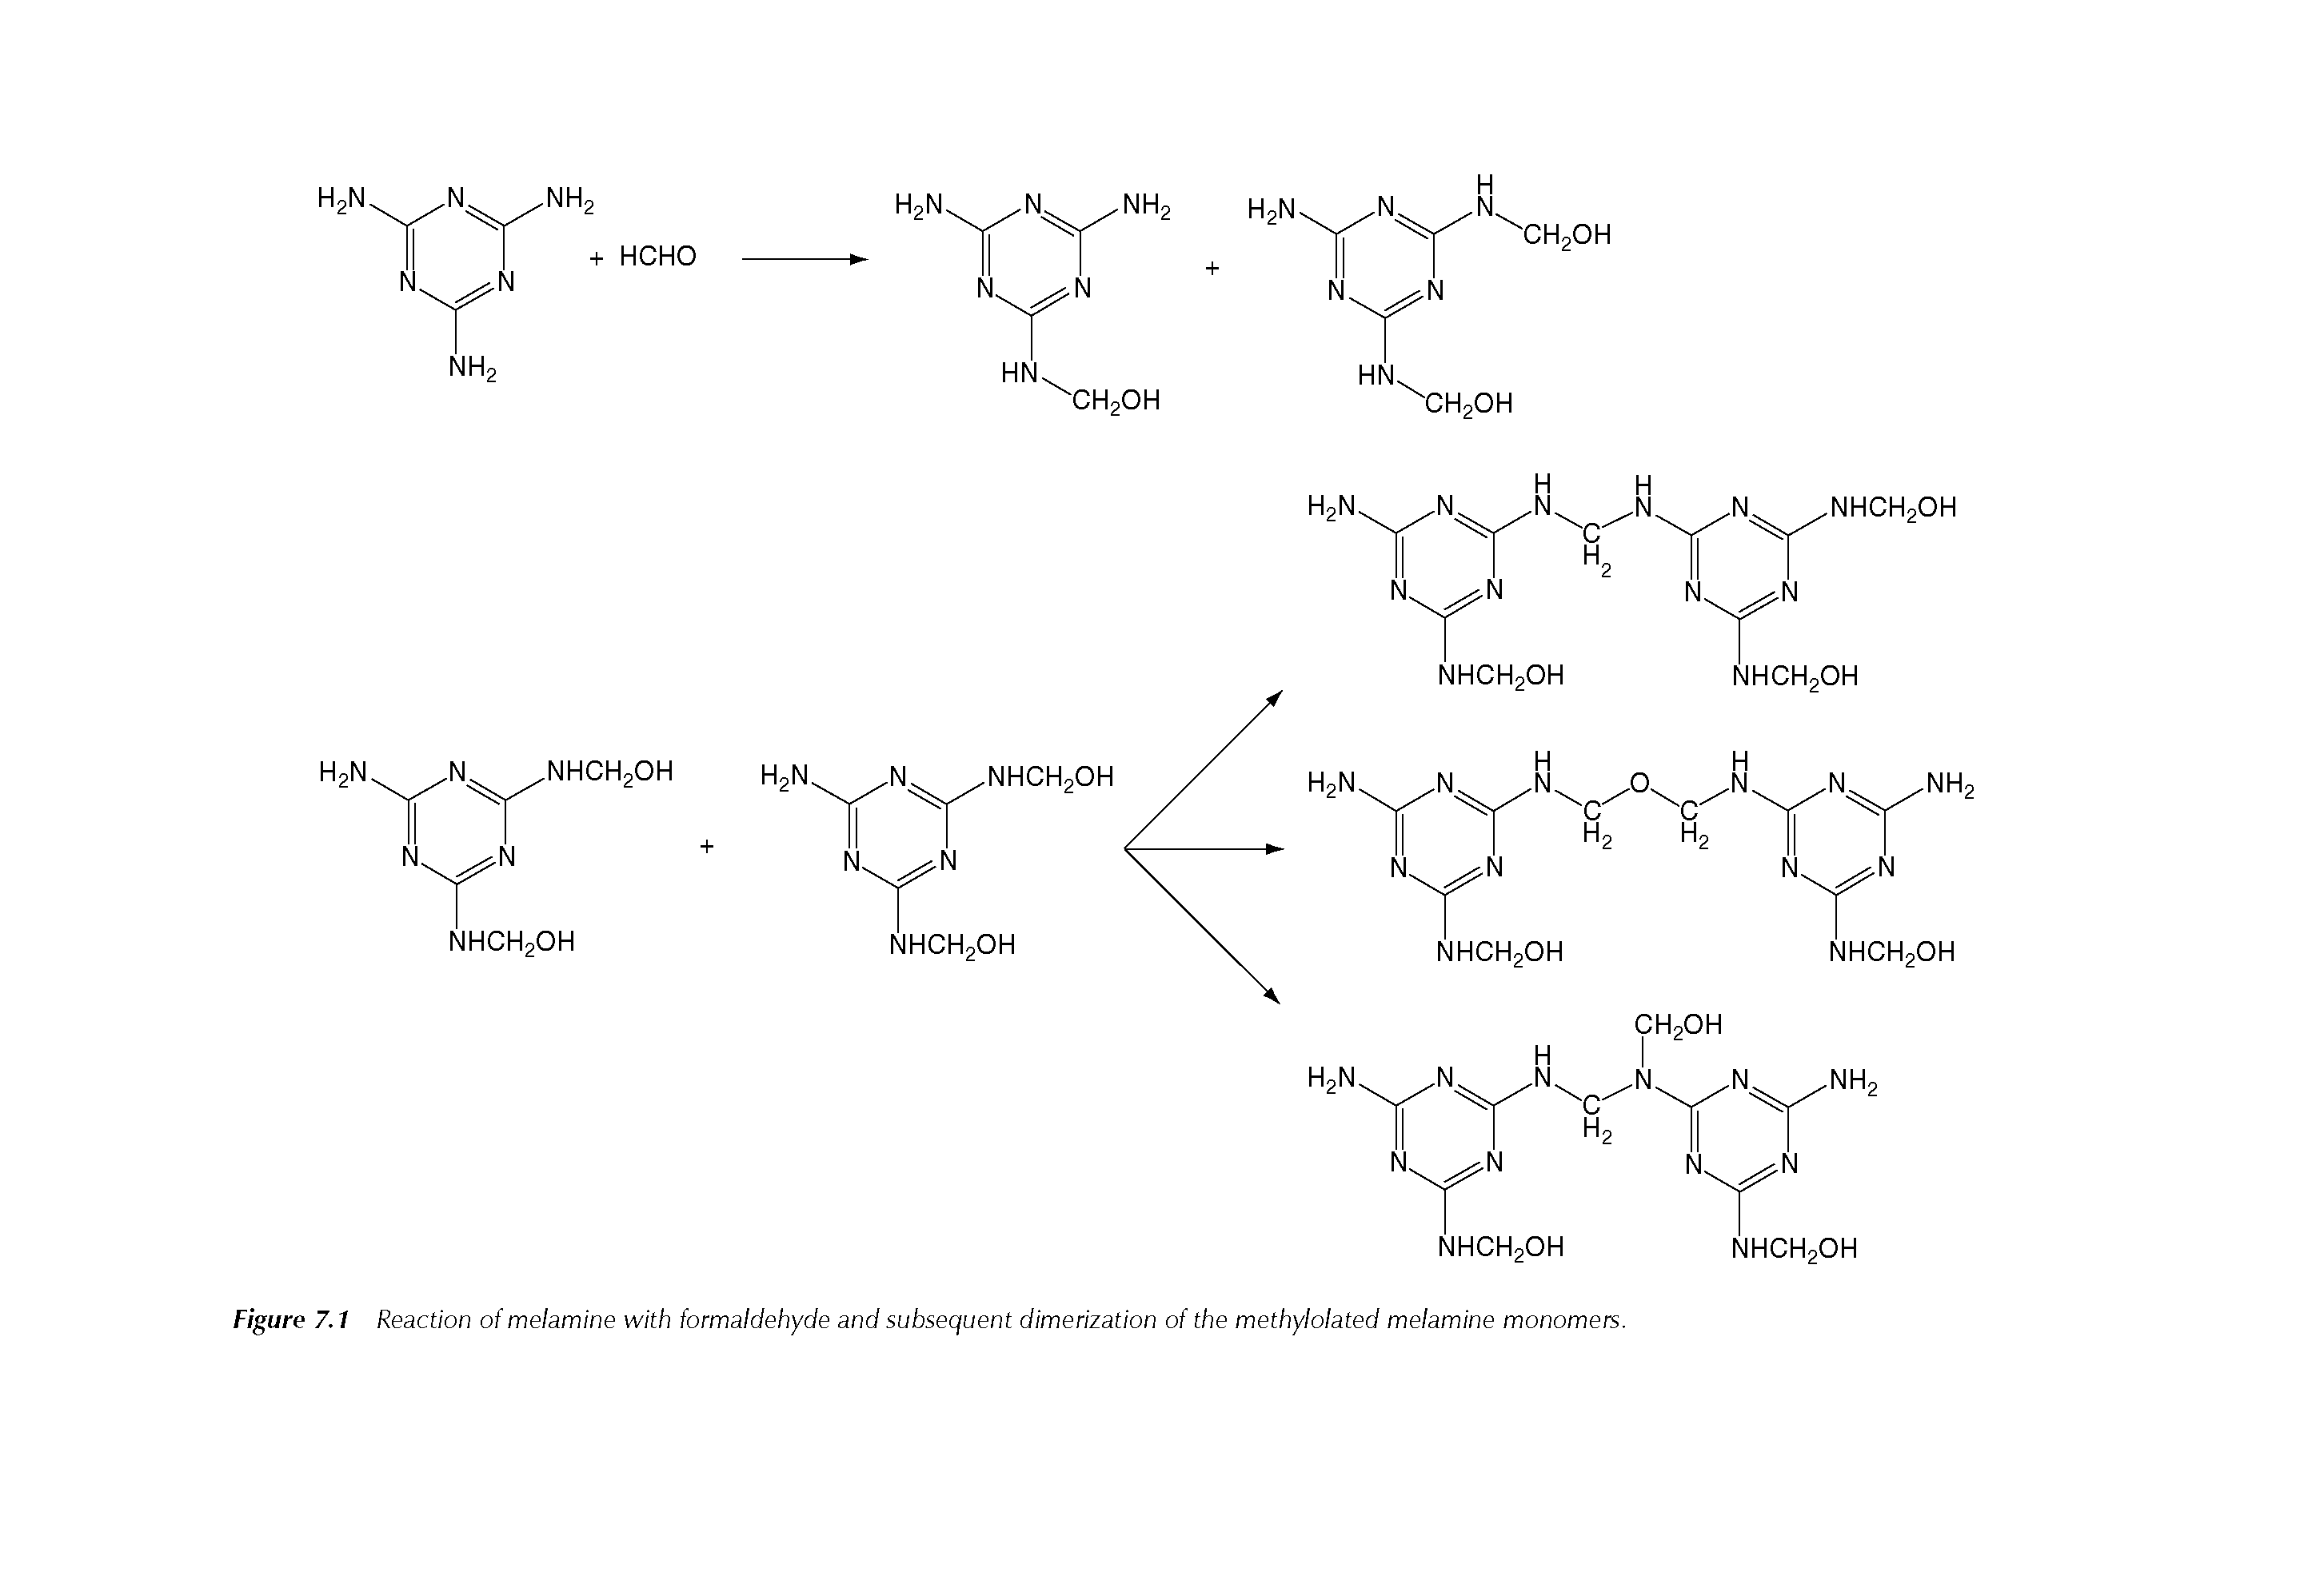 Figure 7.1 Reaction of melamine with formaldehyde and subsequent dimerization of the methylolated melamine monomers.